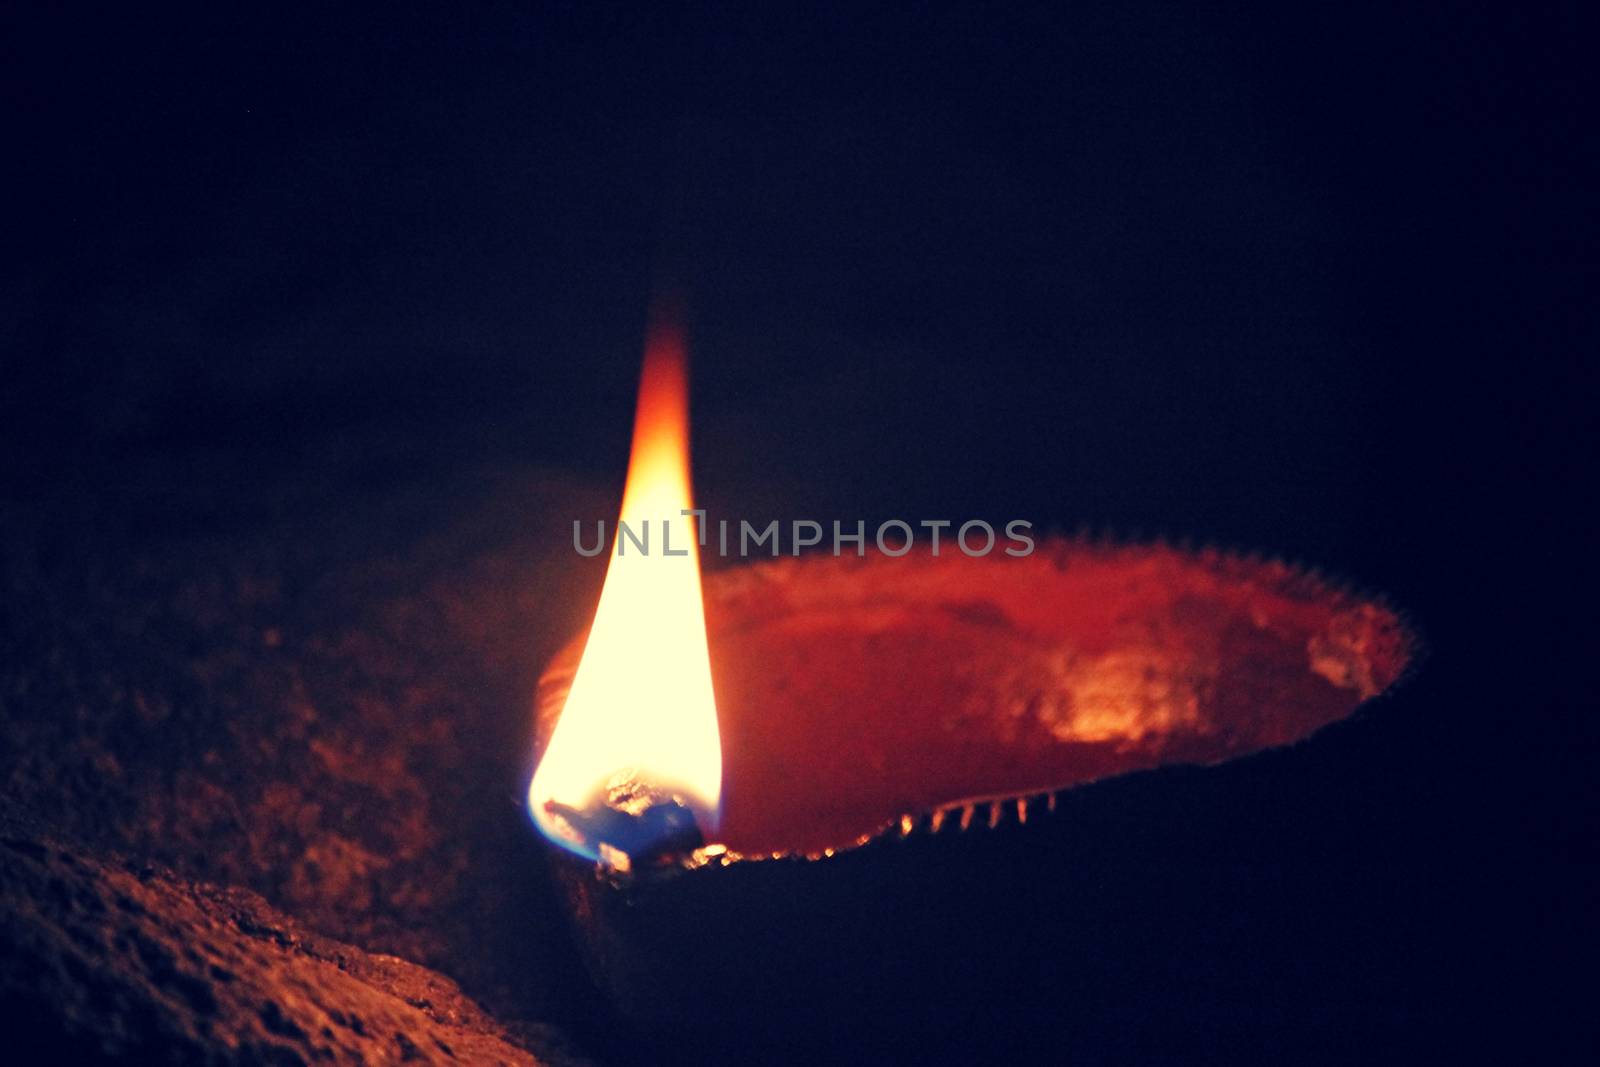 Indian Oil Lamp by yands